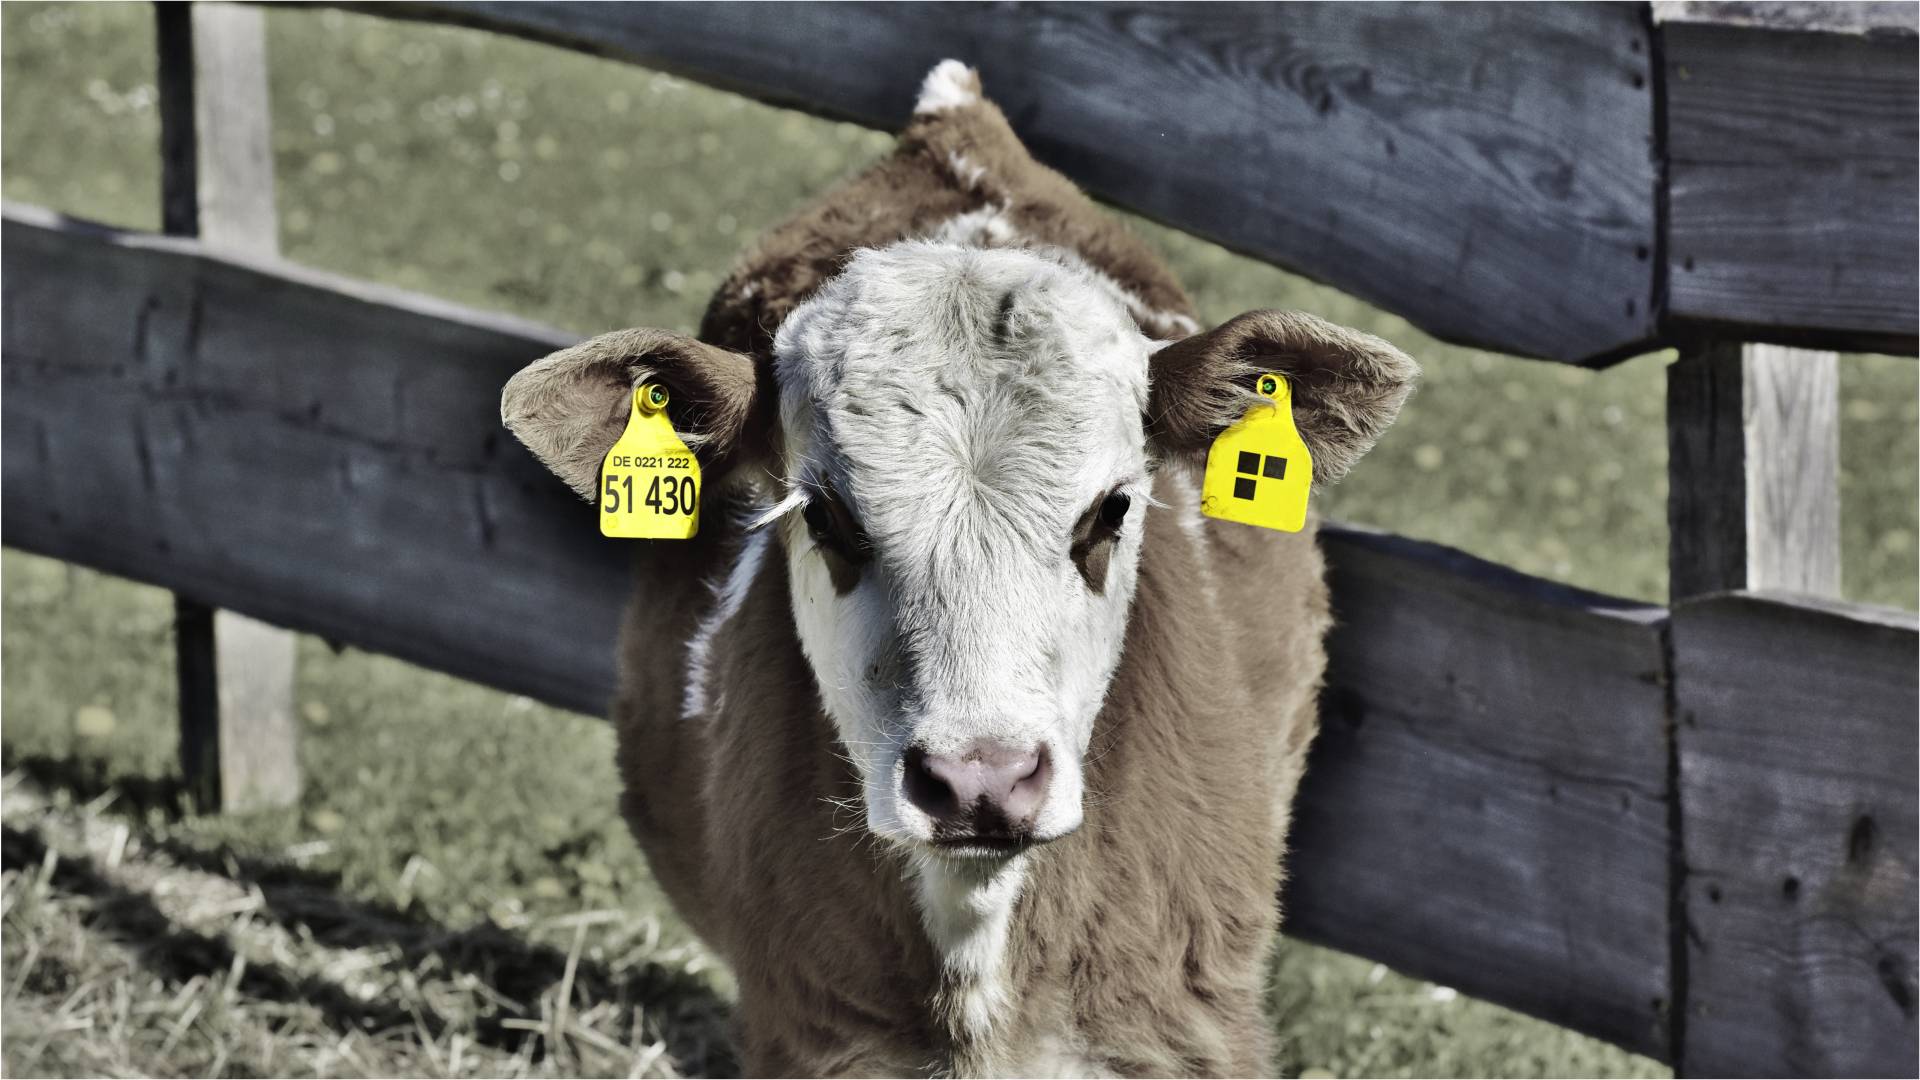 A calf with the stodt brand on its ears